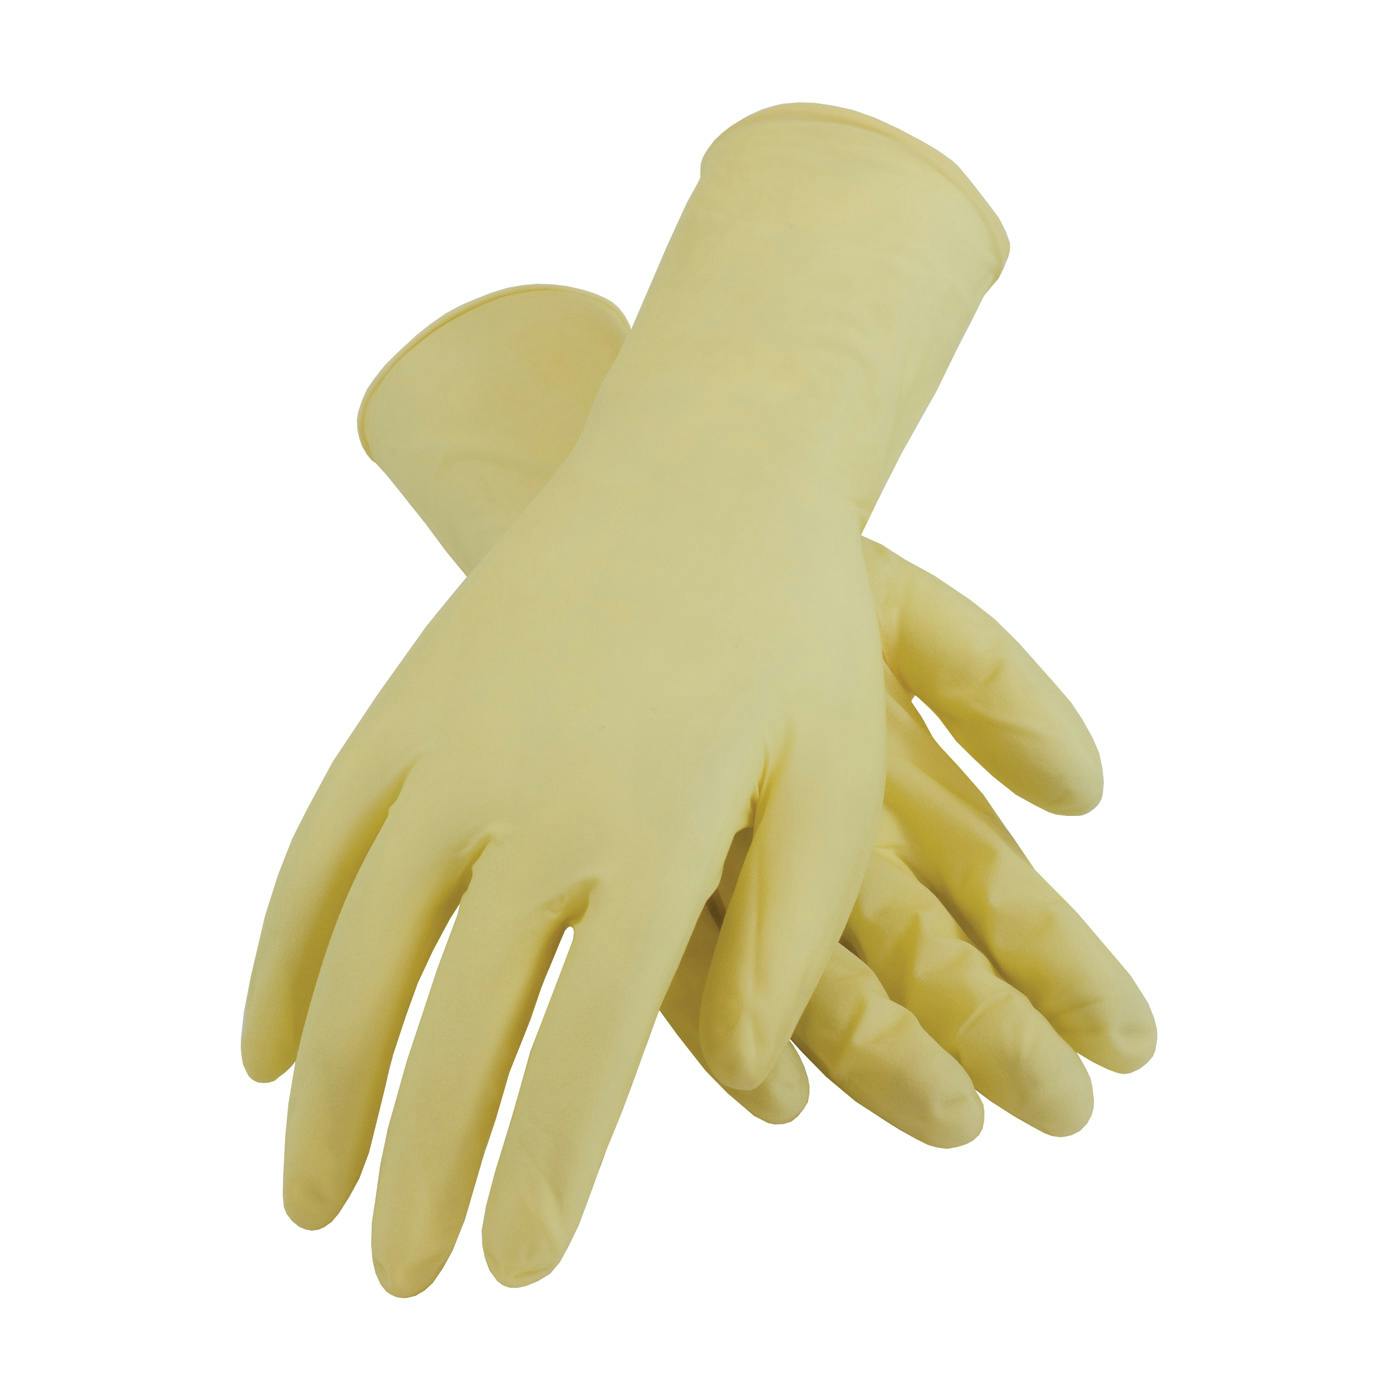 CleanTeam® Single Use Class 10 Cleanroom Latex Glove with Fully Textured Grip - 12" (100-323010)_1